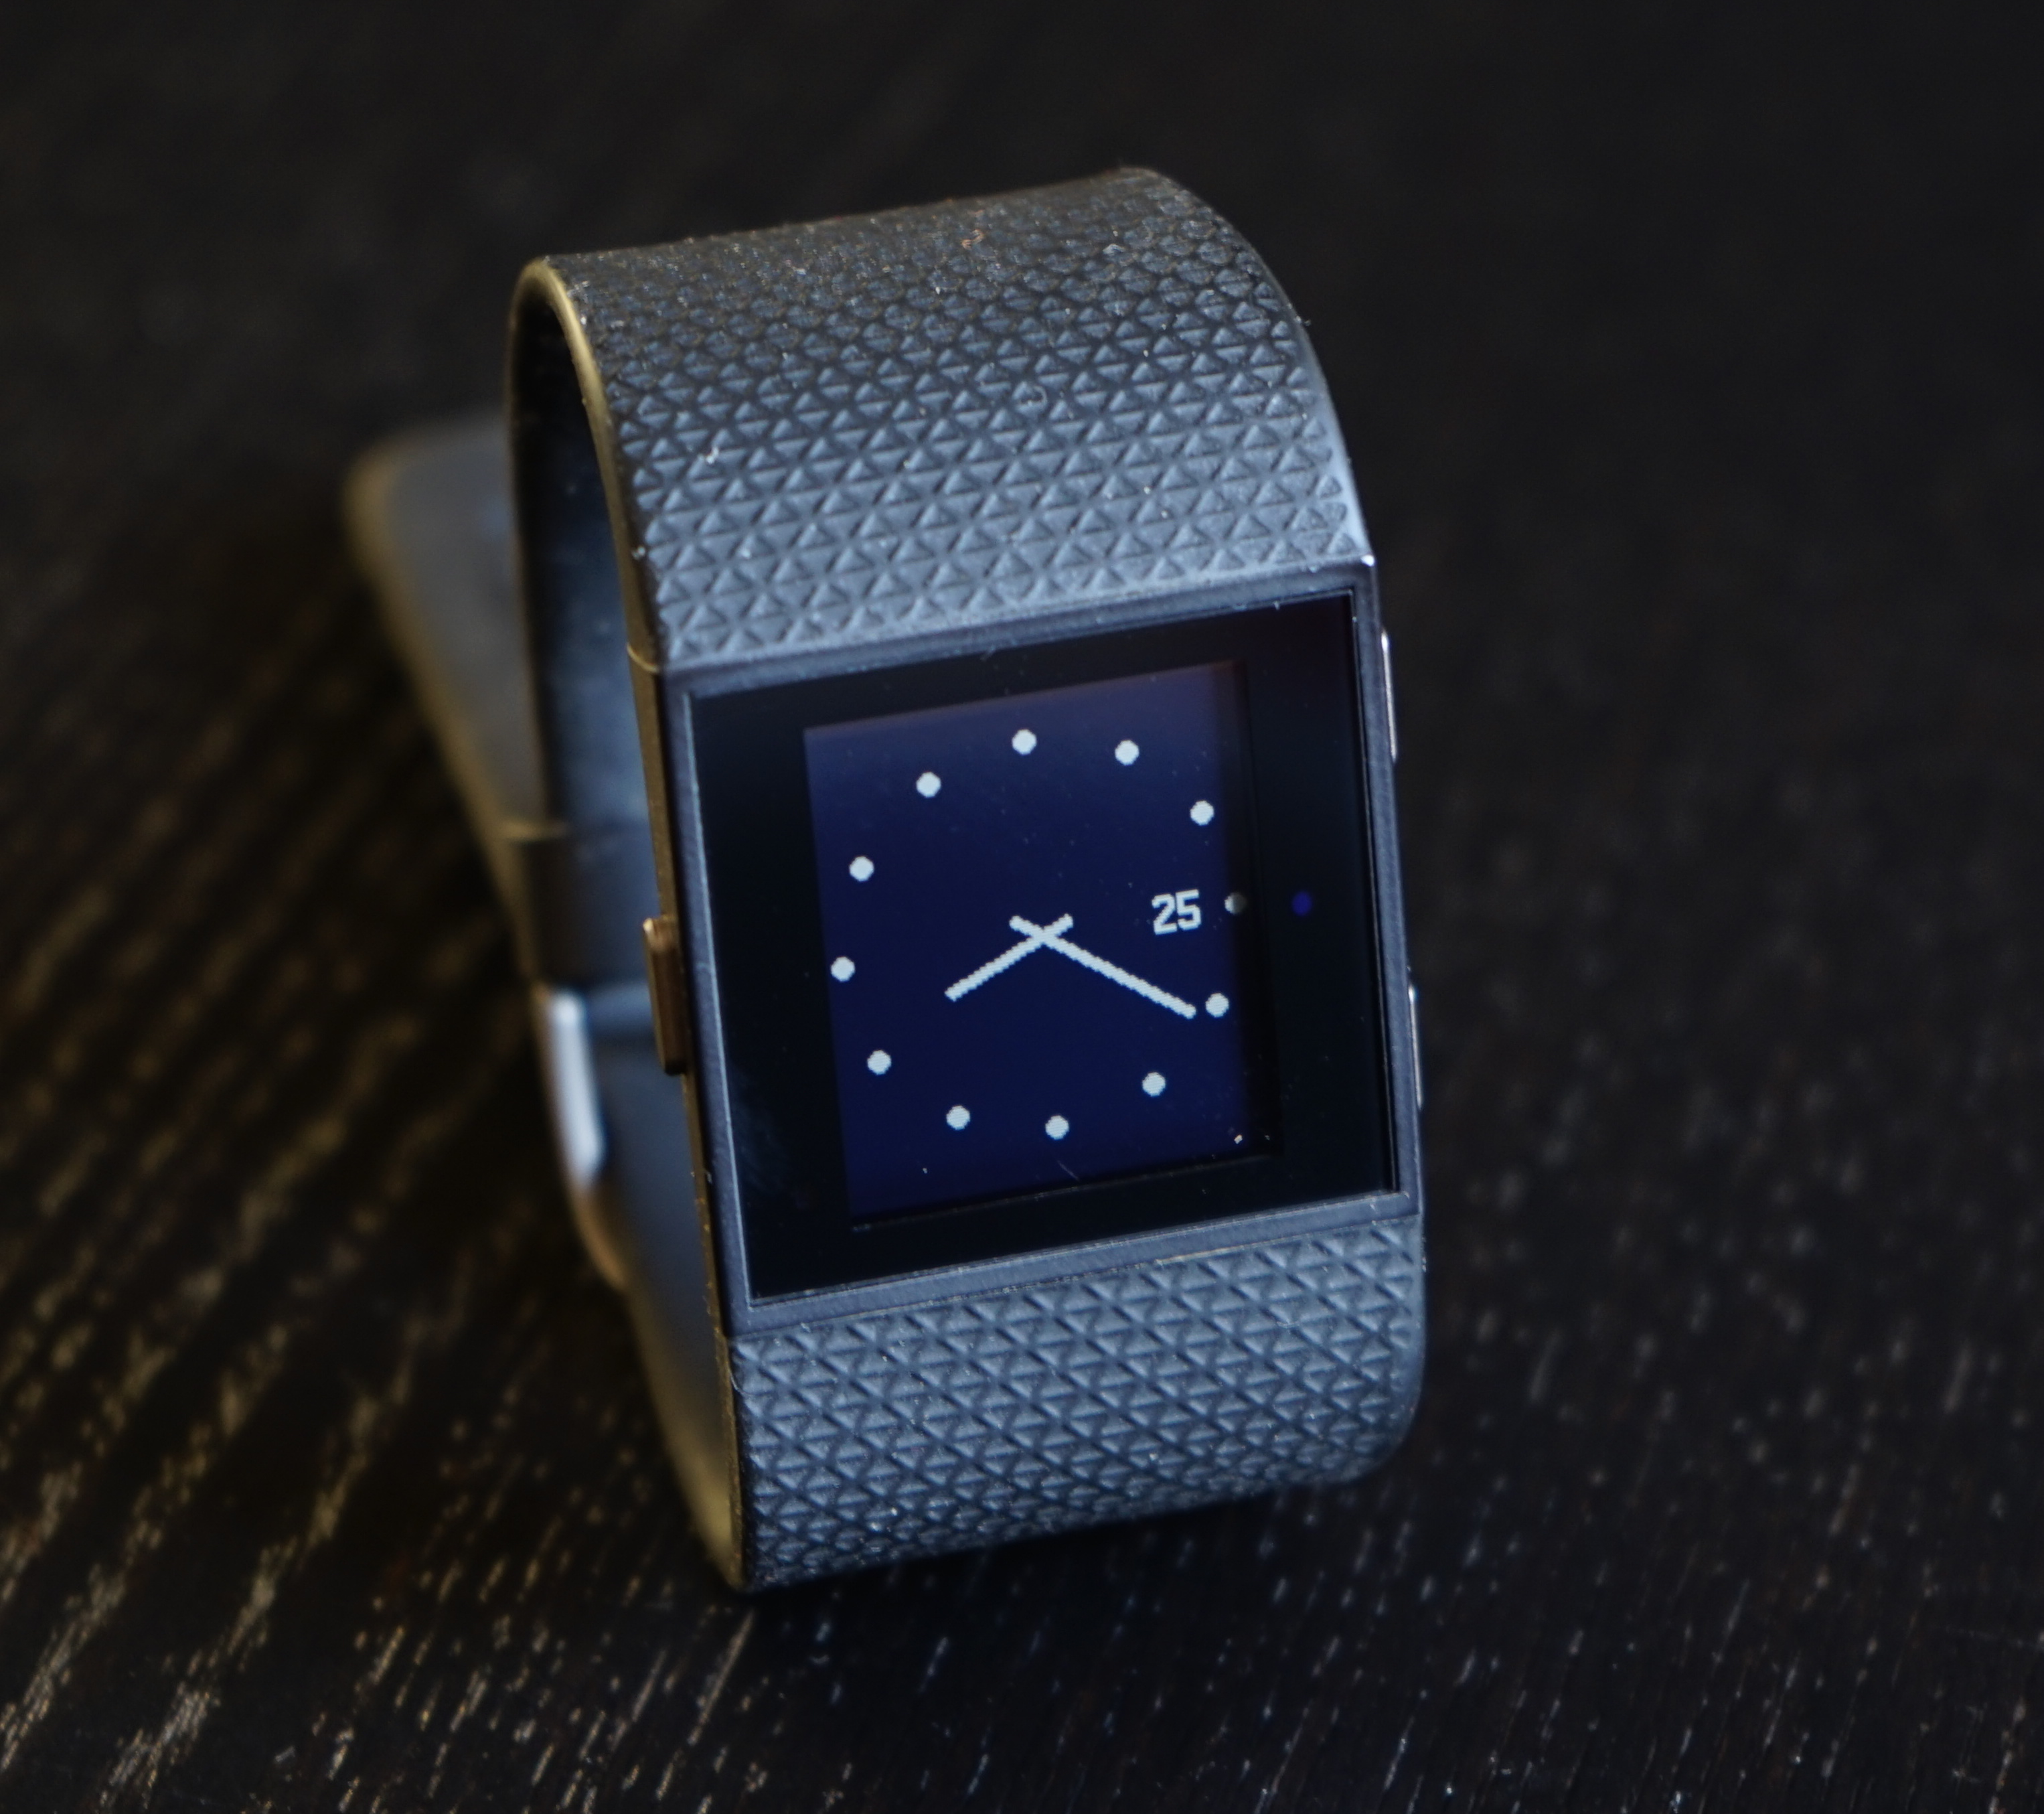 fitbit type devices